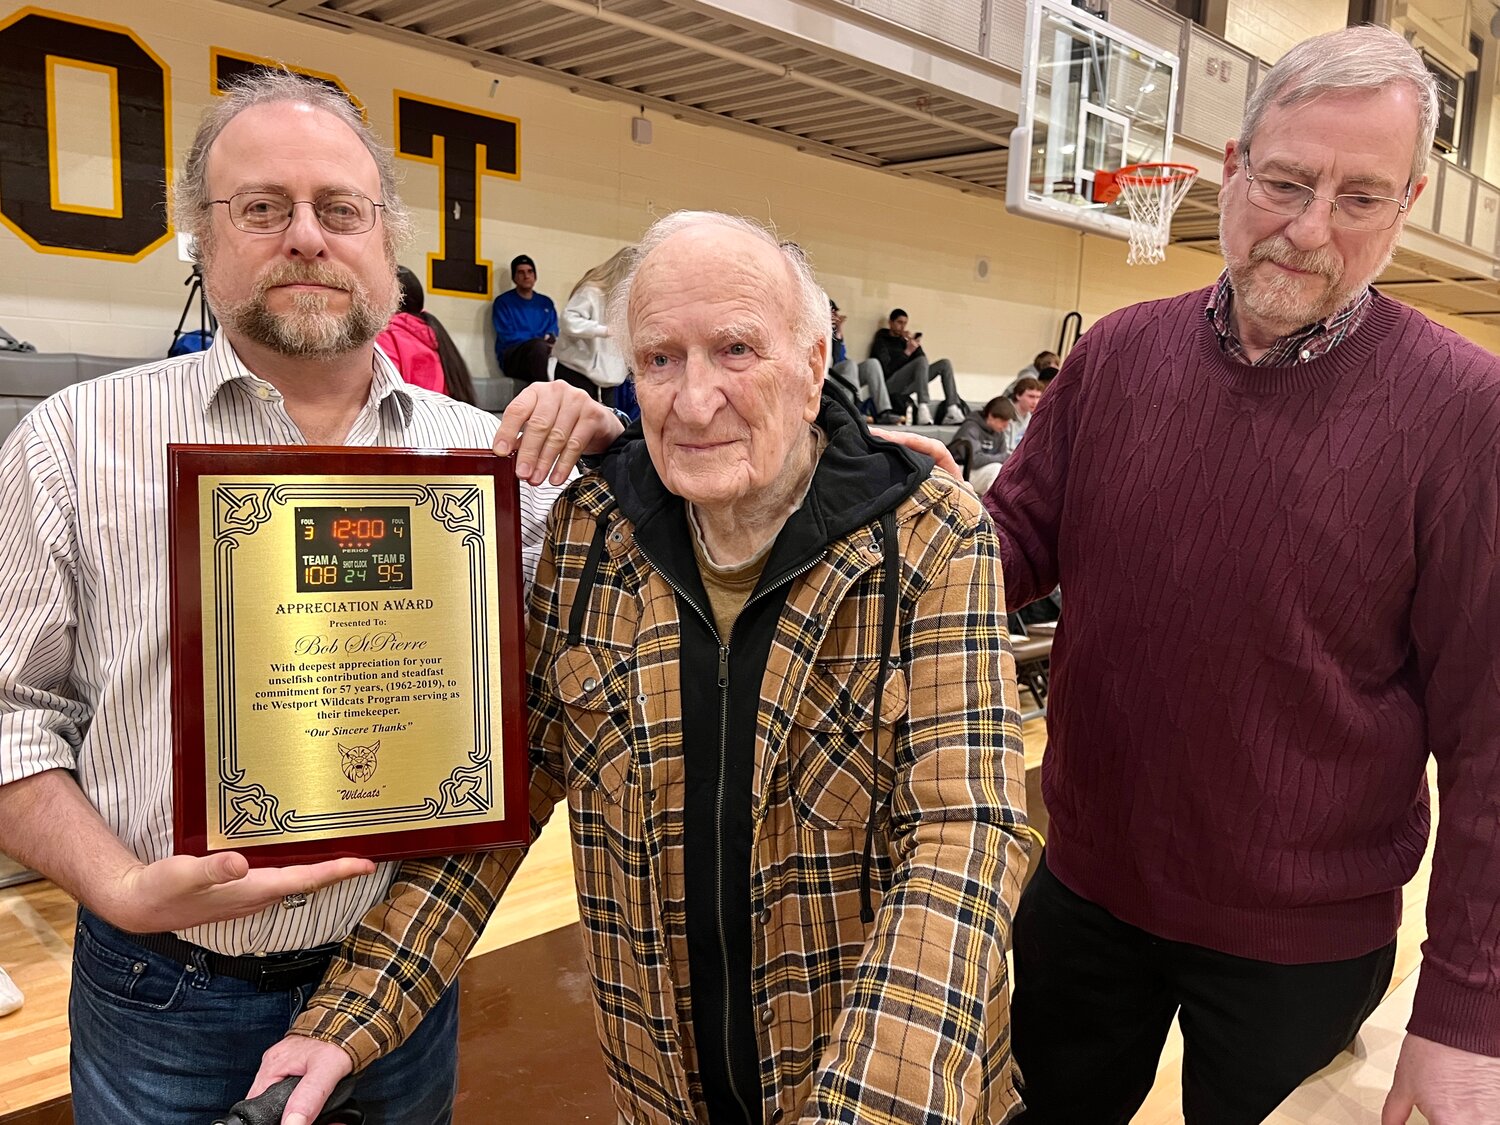 Bob St. Pierre (center) with his sons Jim (left) and Robert (right).